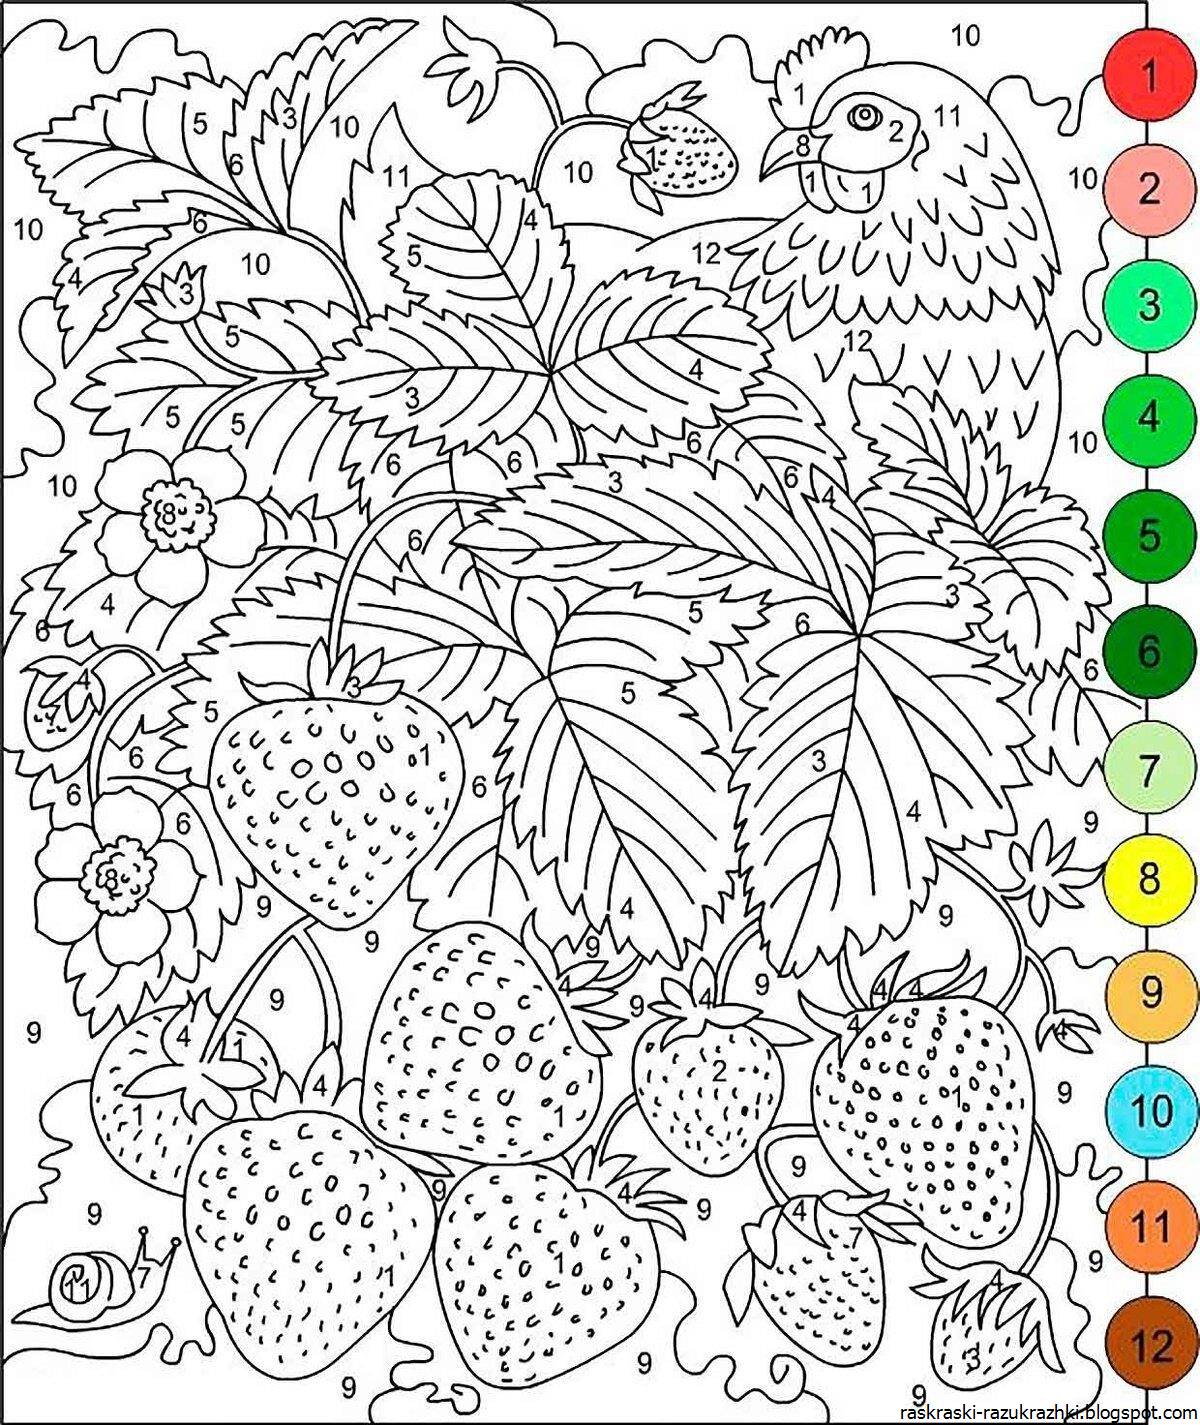 Stimulated coloring by numbers